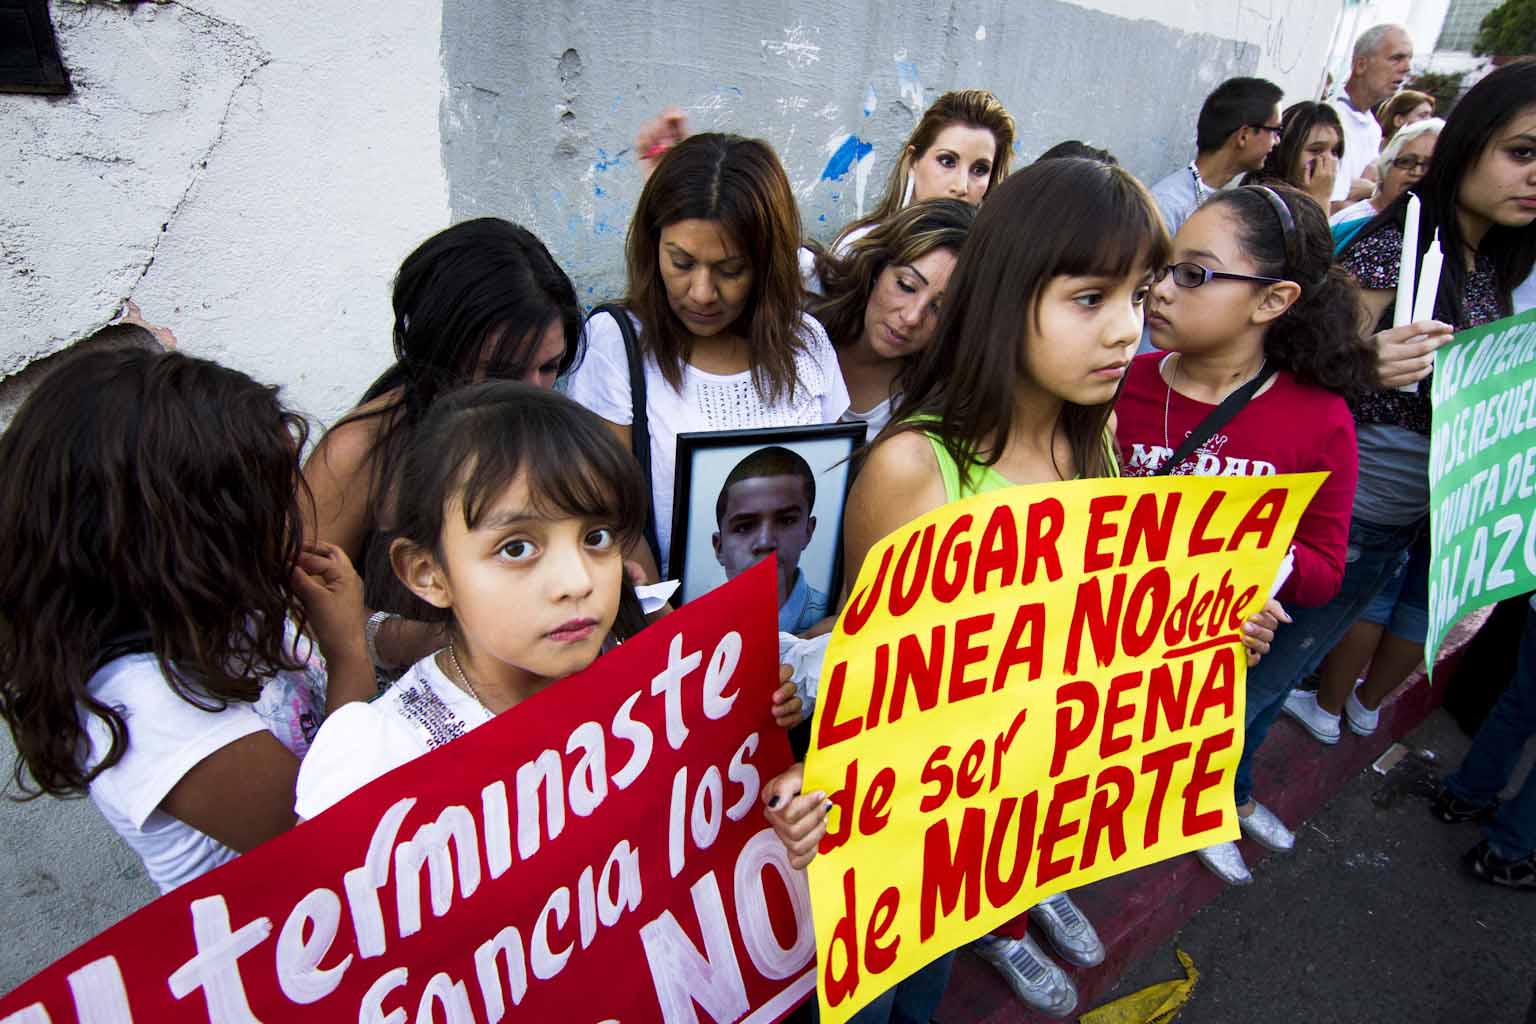 Children gather at the site where José Antonio Elena Rodríguez was killed during a binational protest march, 2 November 2012.  Credit: Murphy Woodhouse.